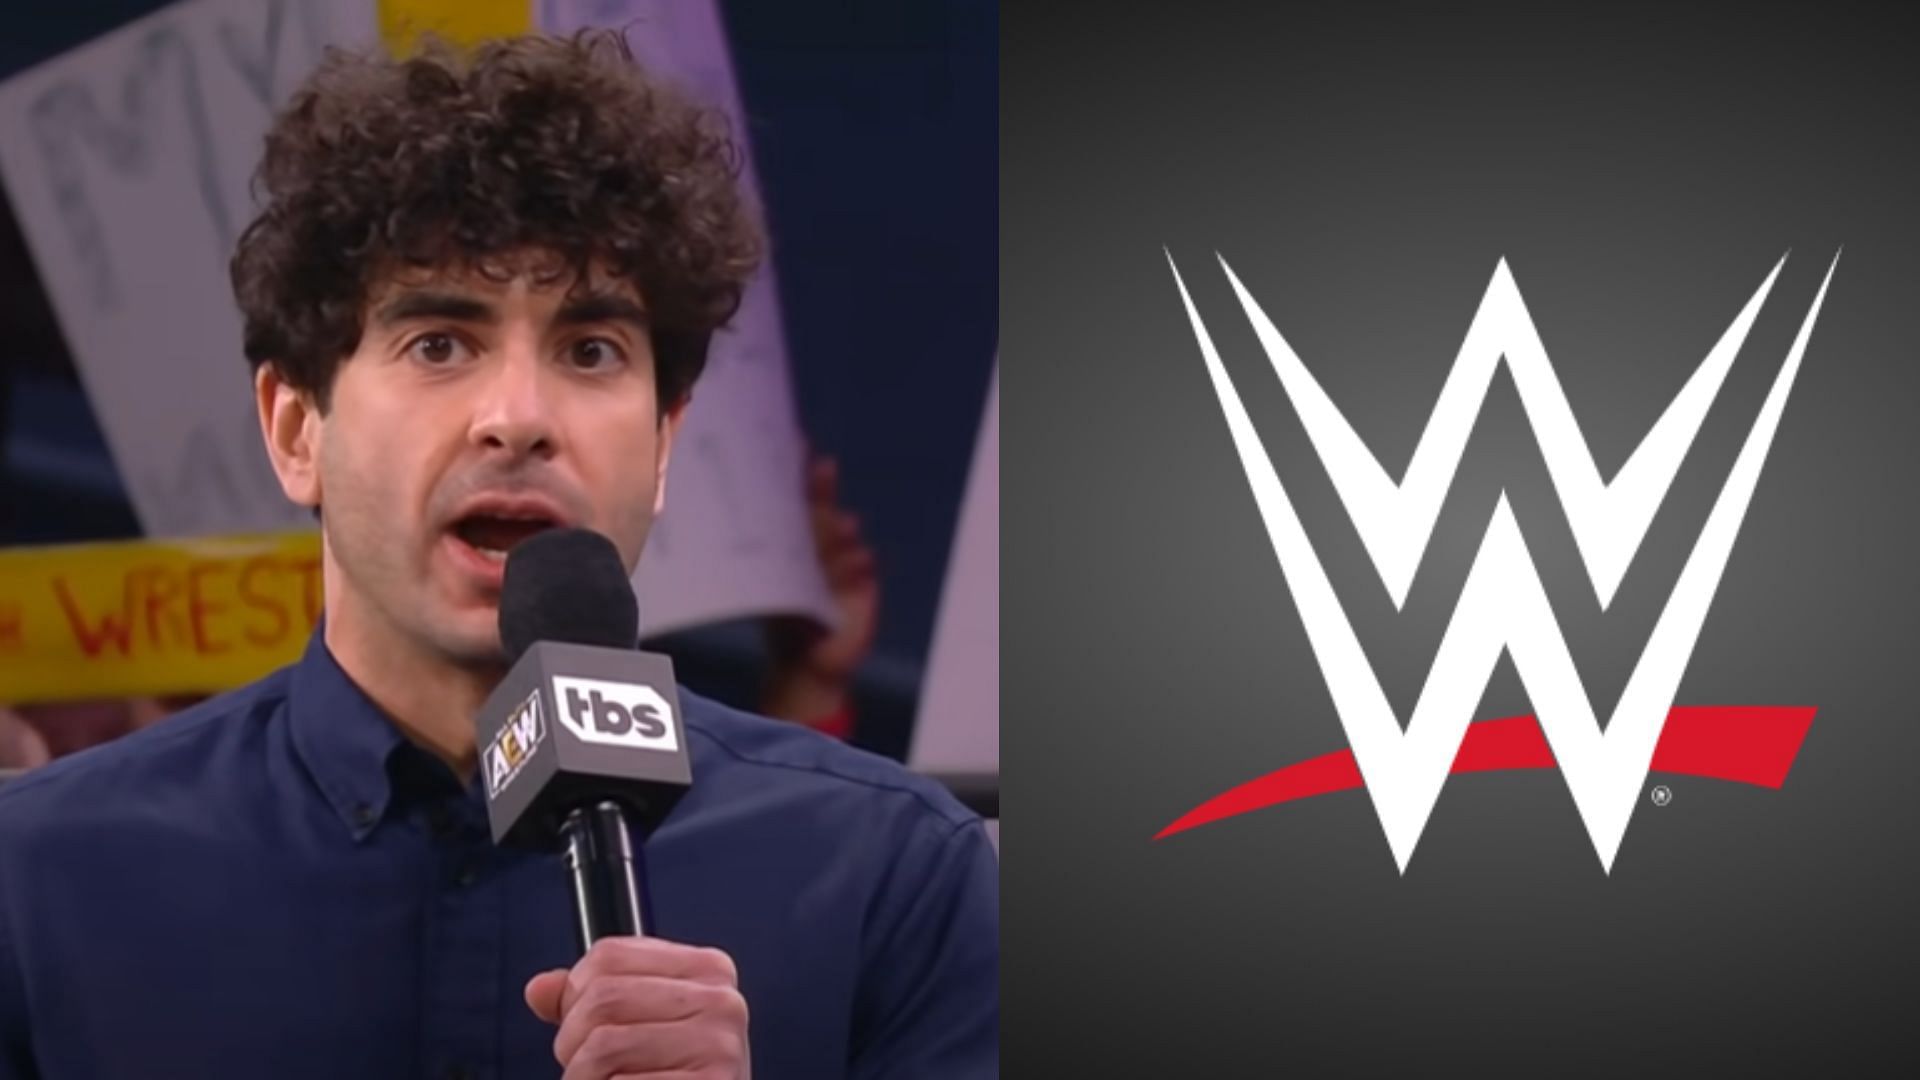 Tony Khan leads AEW, which he founded in 2019 [Image Credits: WWE